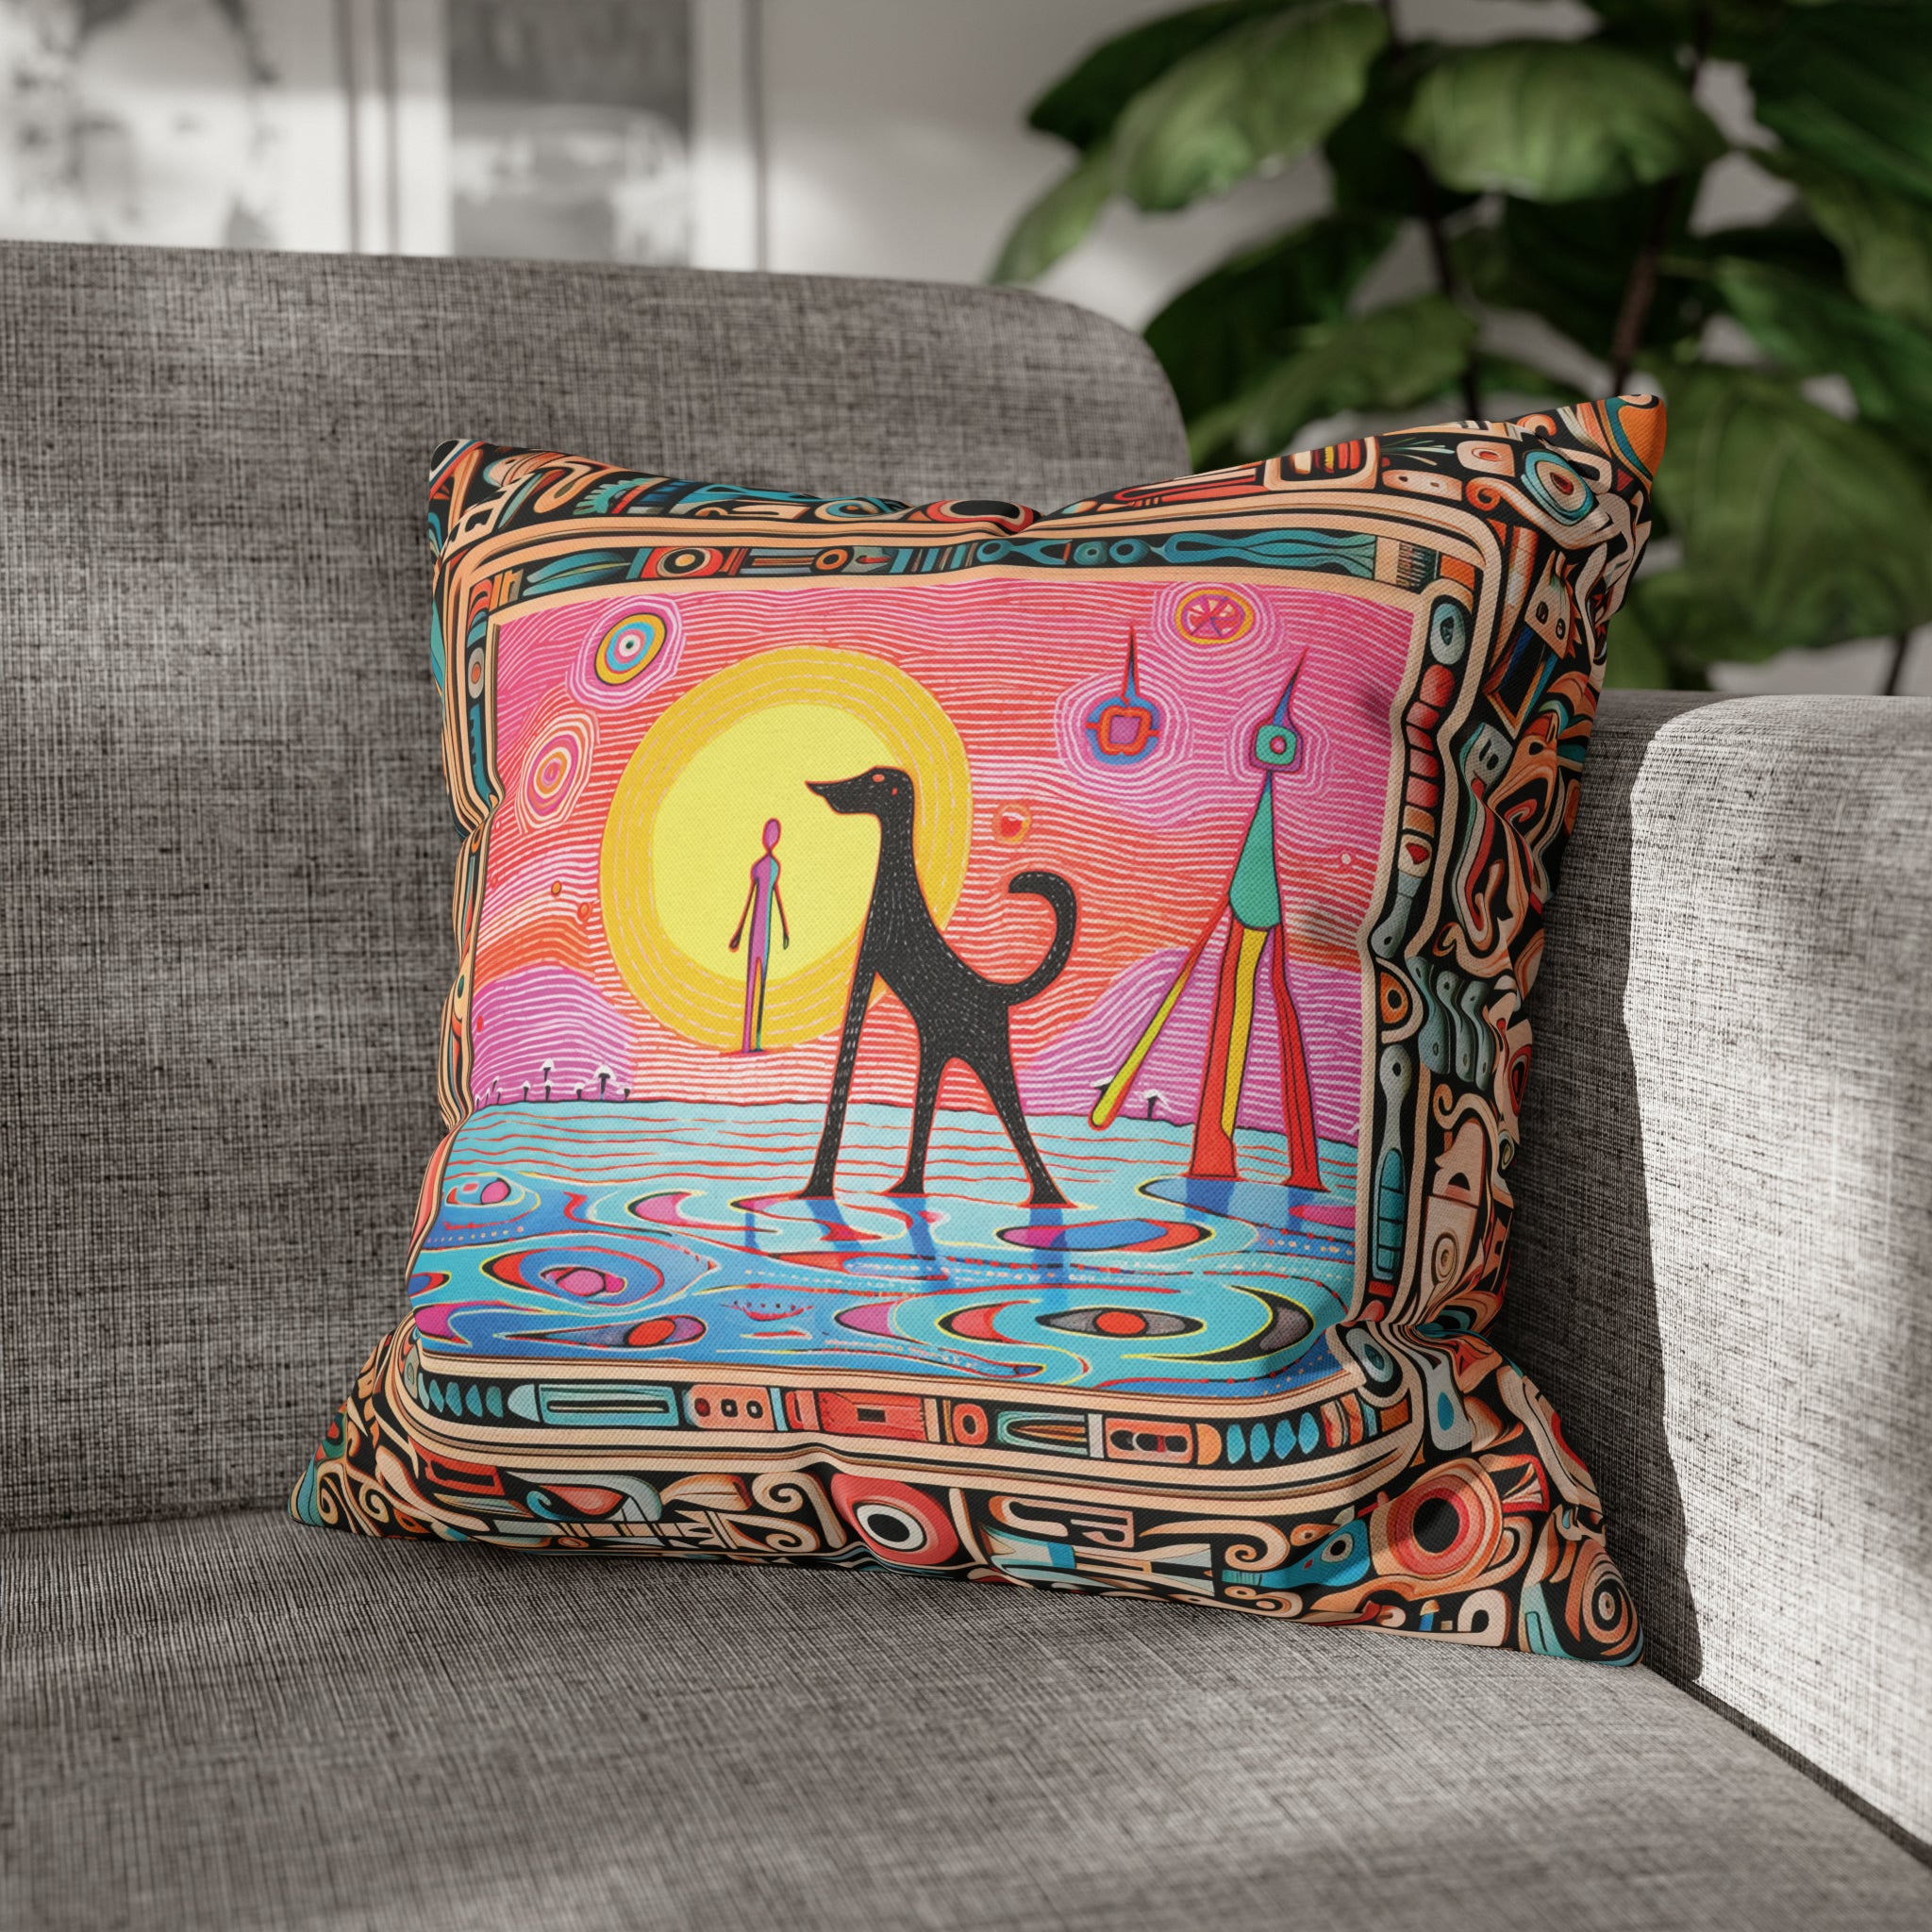 Square Pillow Case 18" x 18", CASE ONLY, no pillow form, original Pop Art Style, Alien Dog Taking a Swim, Image in a frame